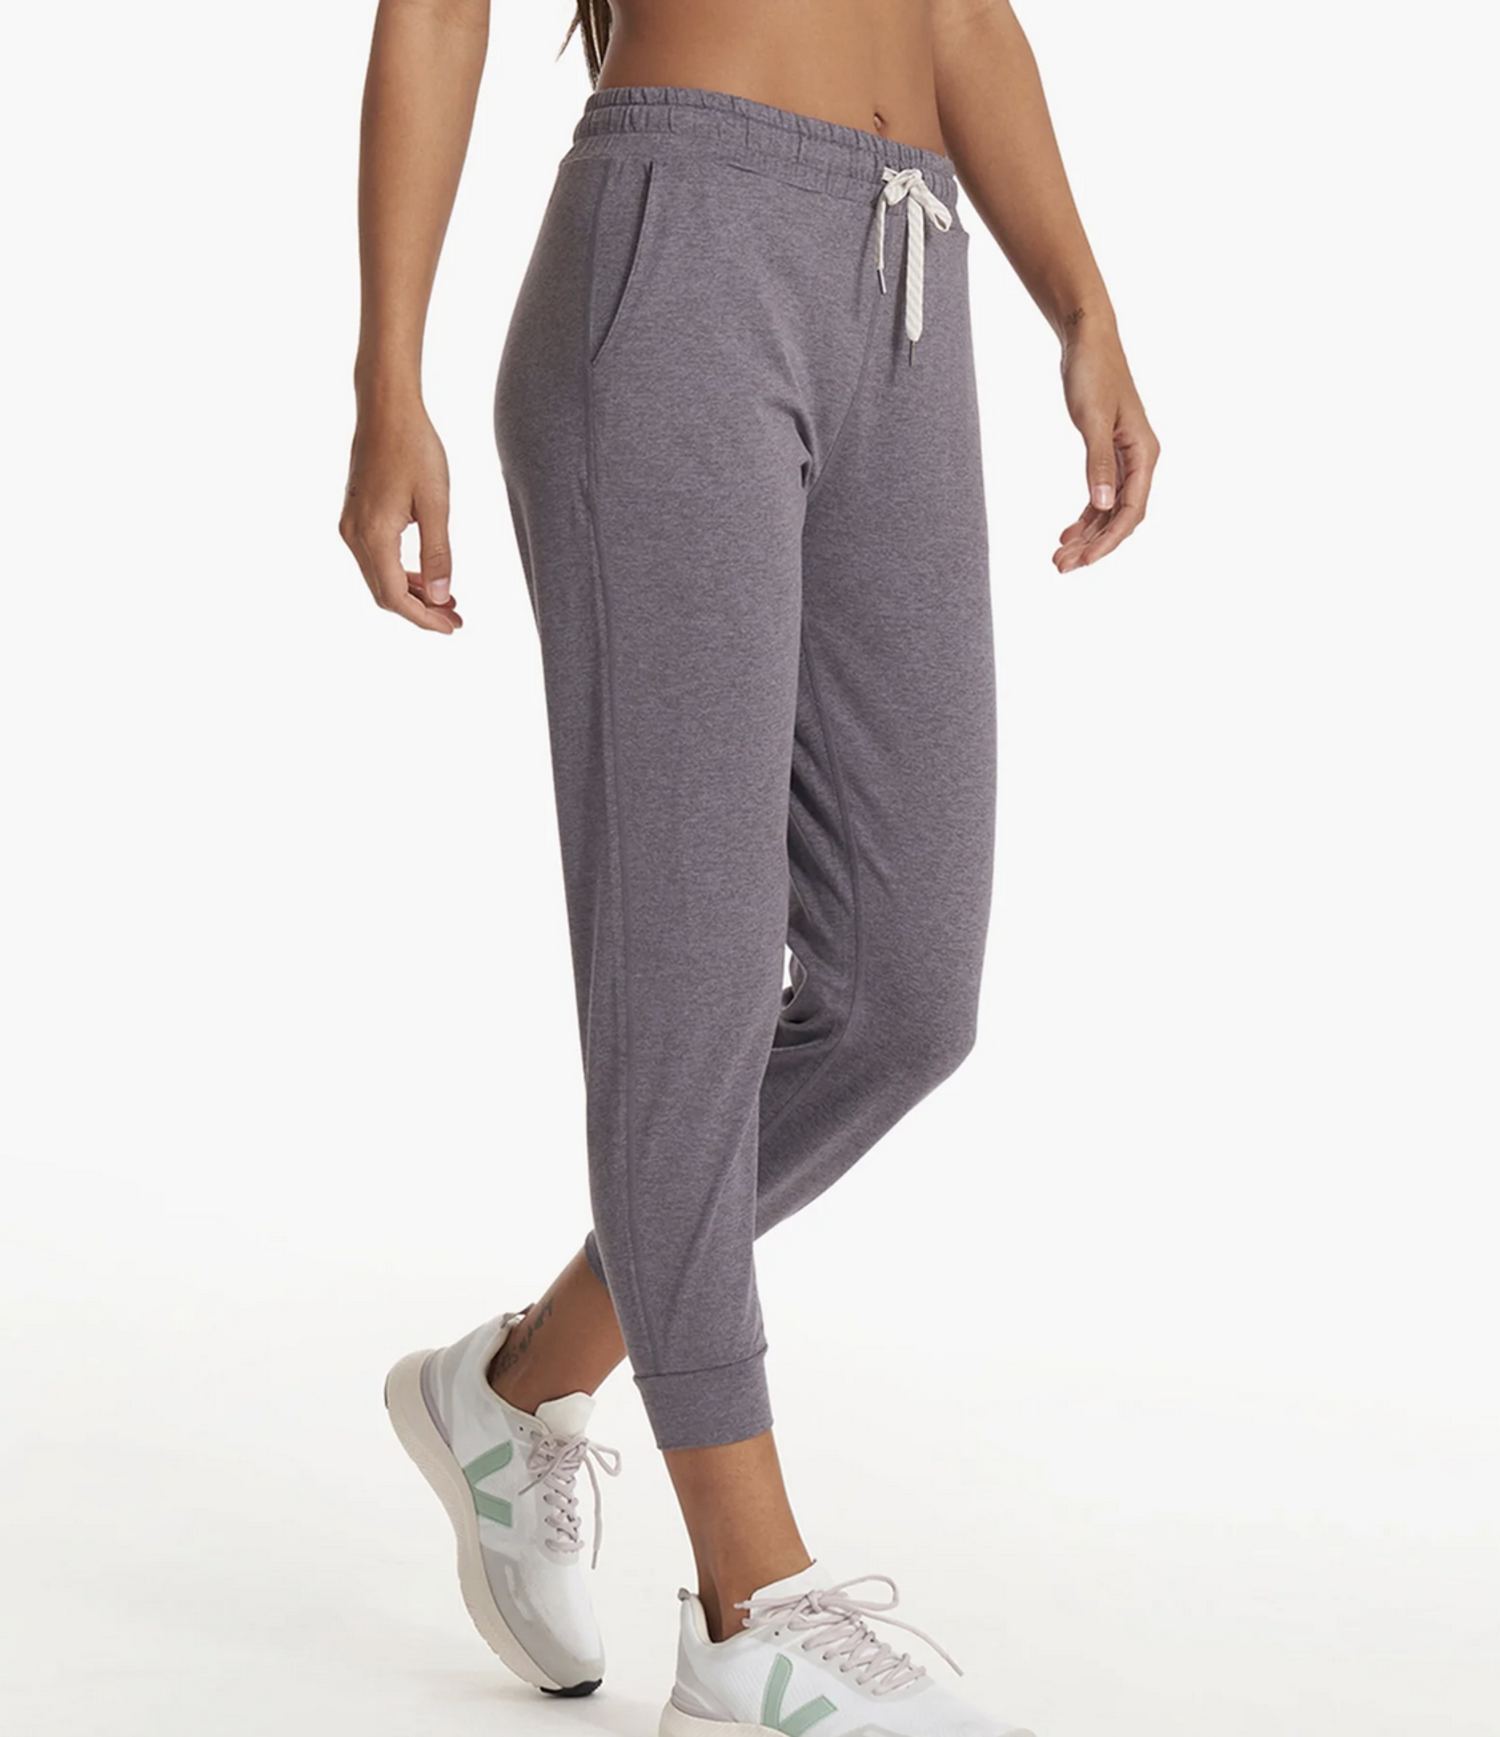 W Performance Jogger - Pale Grey Heather - Twisted Tree